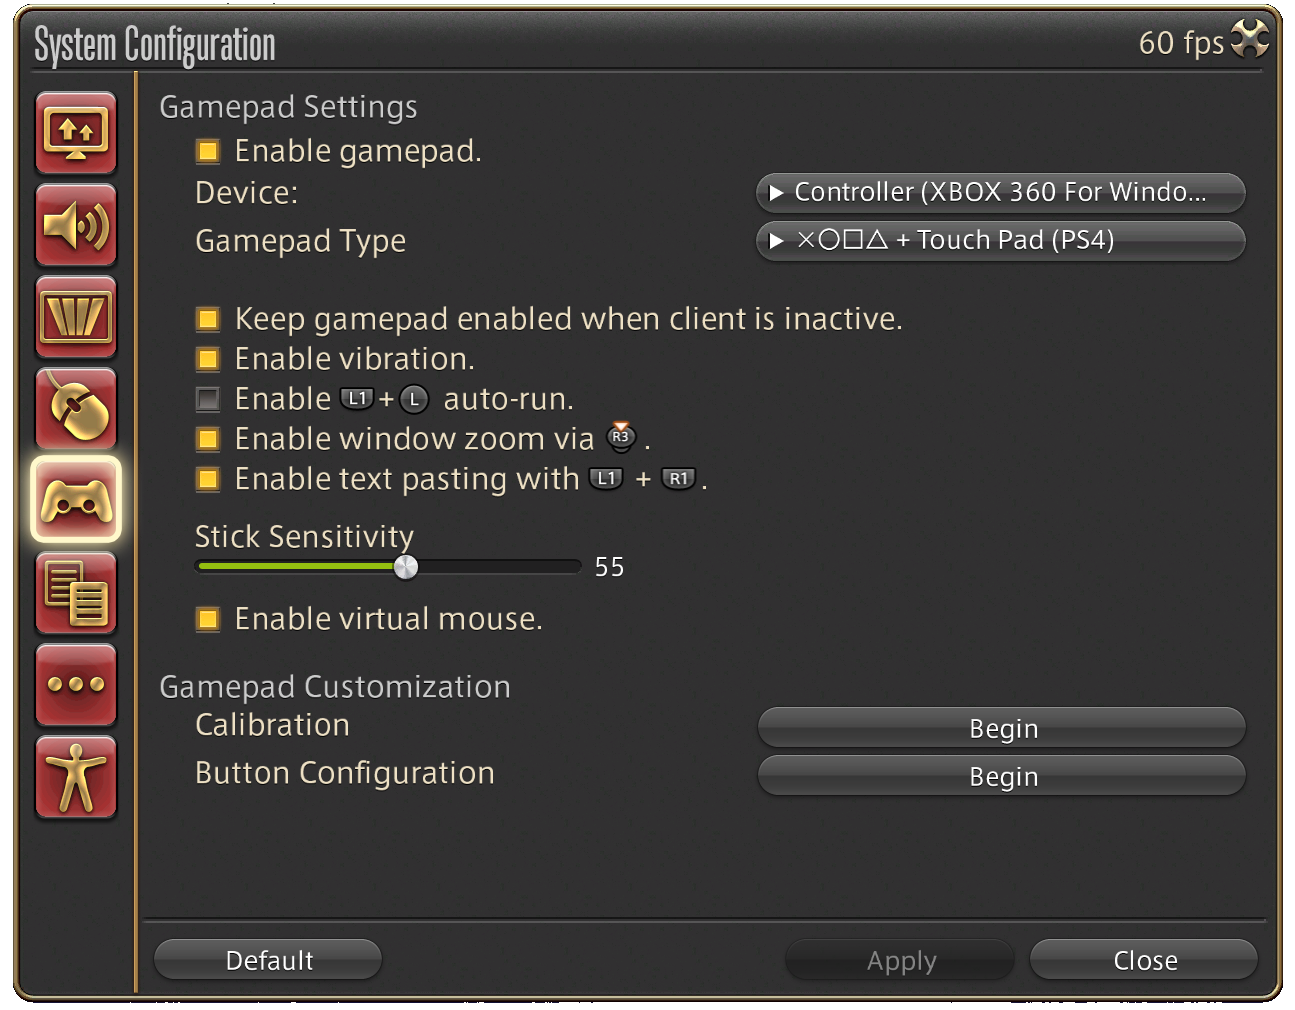 System Configuration - PC - Controller Settings